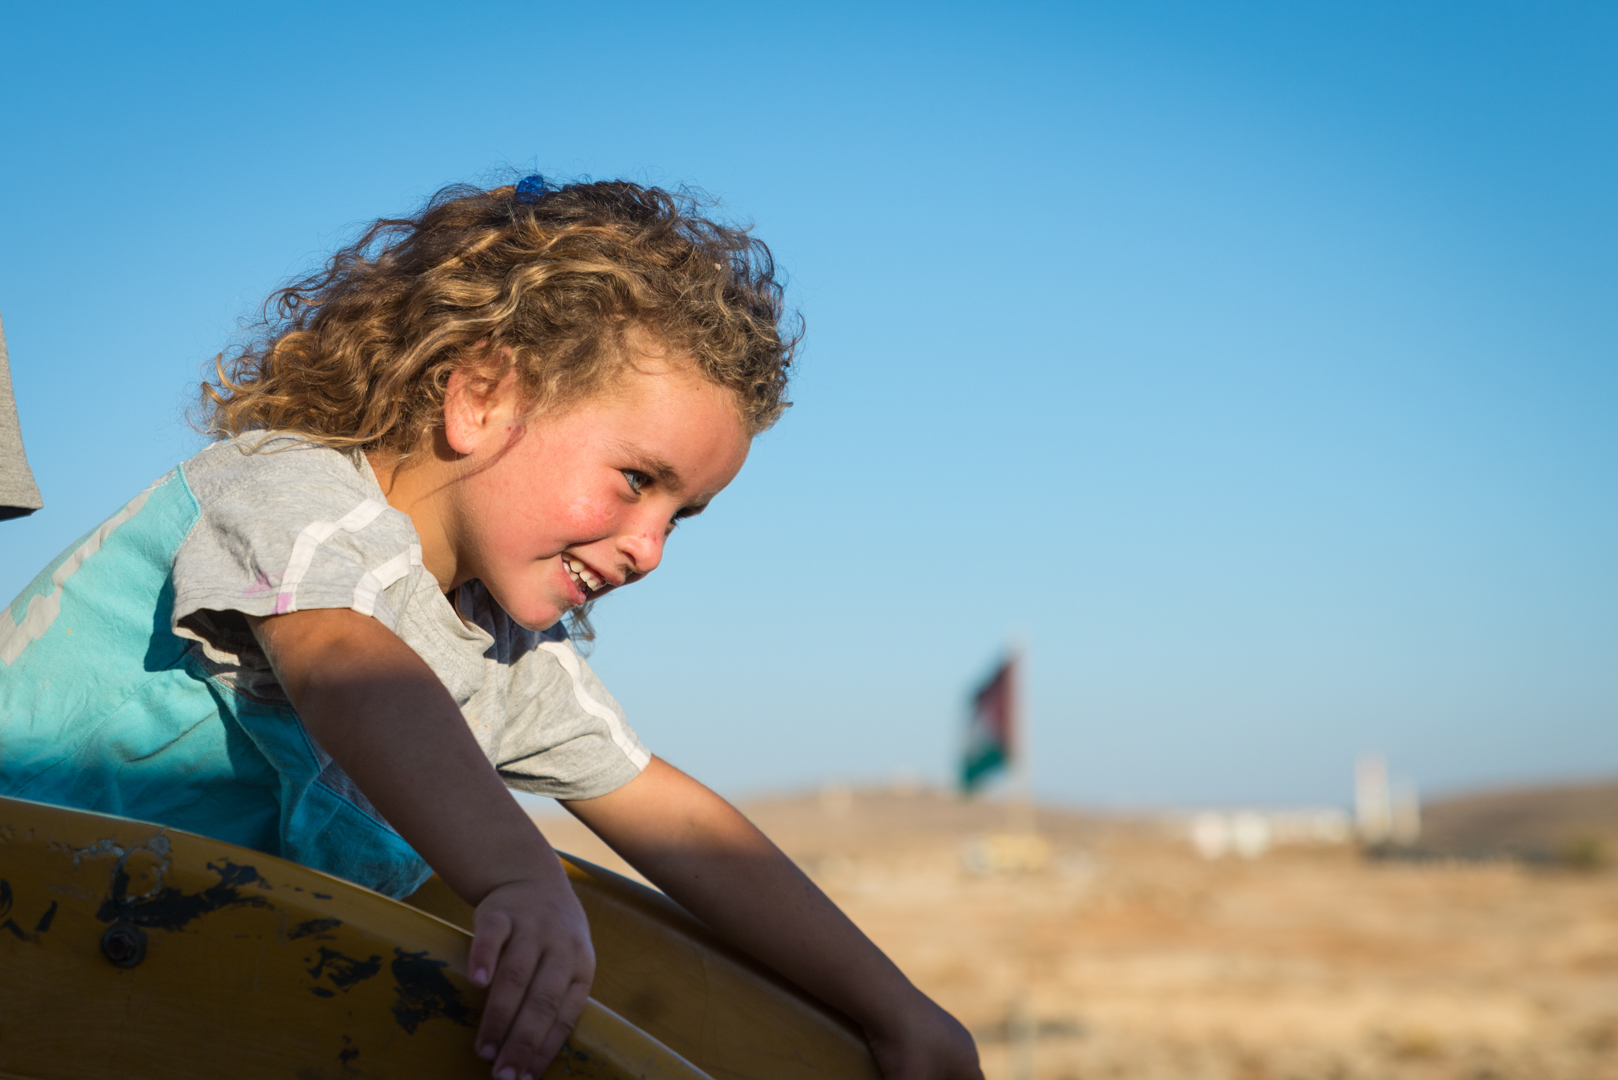 A Palestinian girl plays on a slide in Susiya, oblivious to the fact that it may soon be demolished along with the rest of the village.